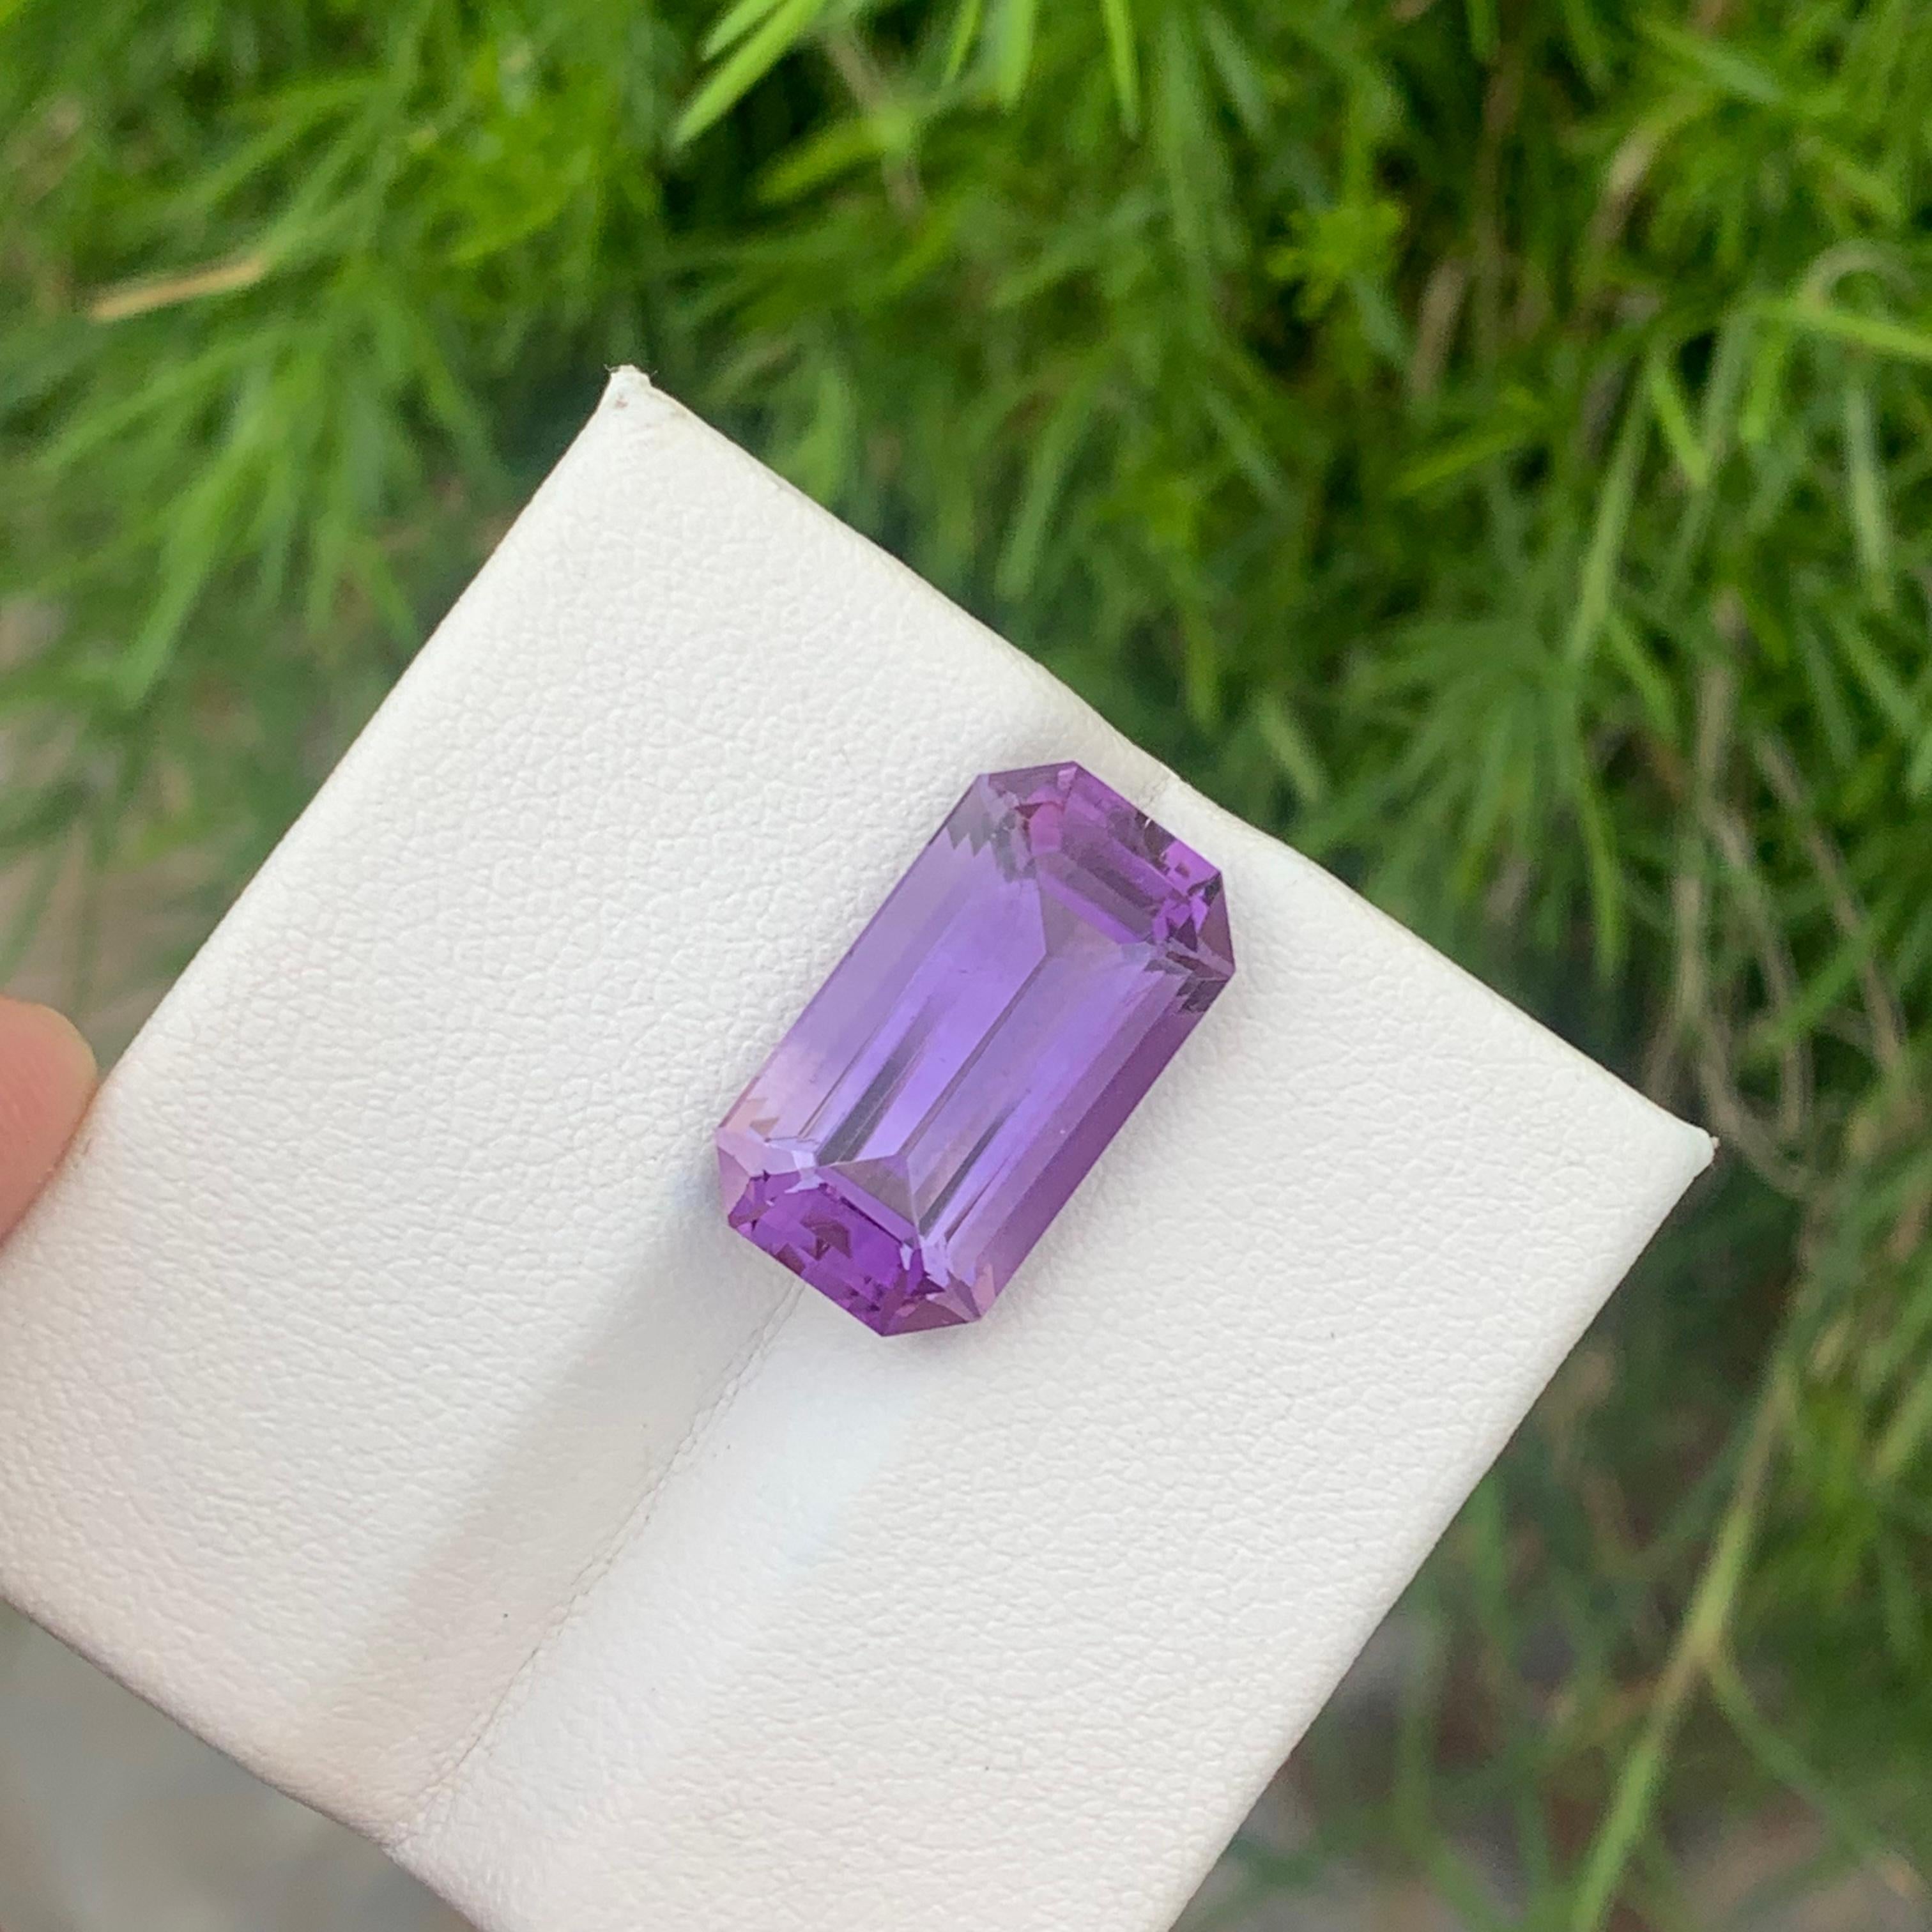 10.15 Carats Natural Loose Purple Amethyst Gem For Jewelry Making Emerald Shape For Sale 6